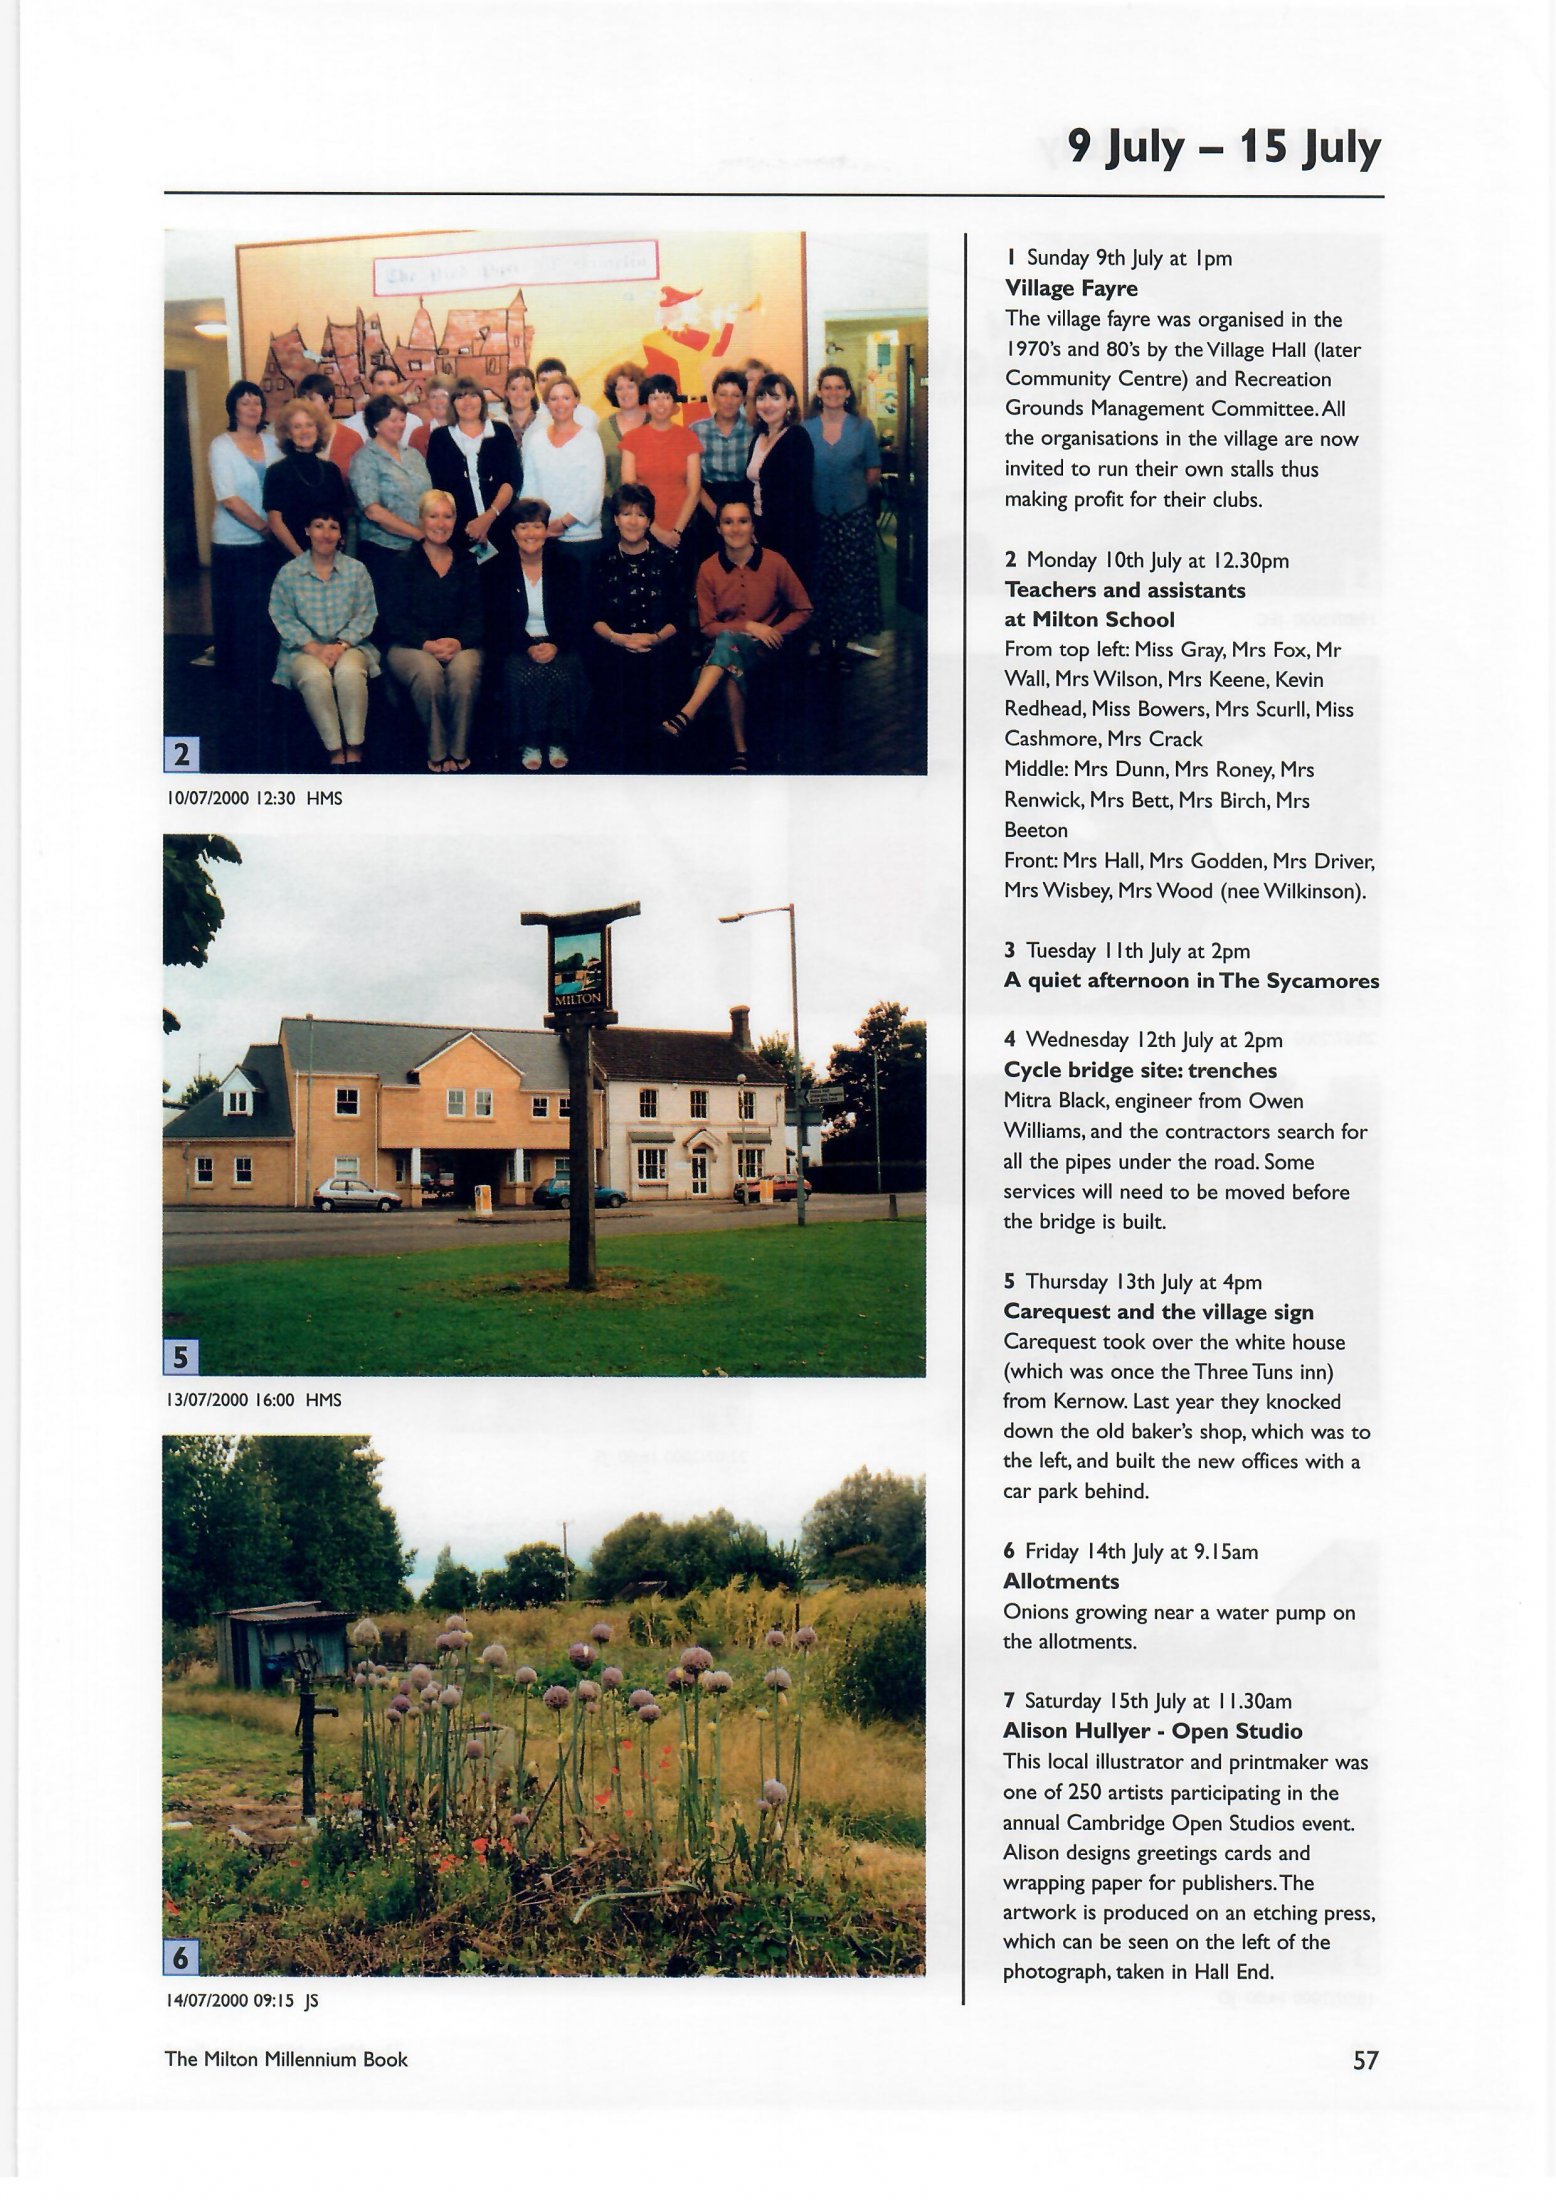 Milton 2000 July - Aug Pages - 54 -63 B -0004